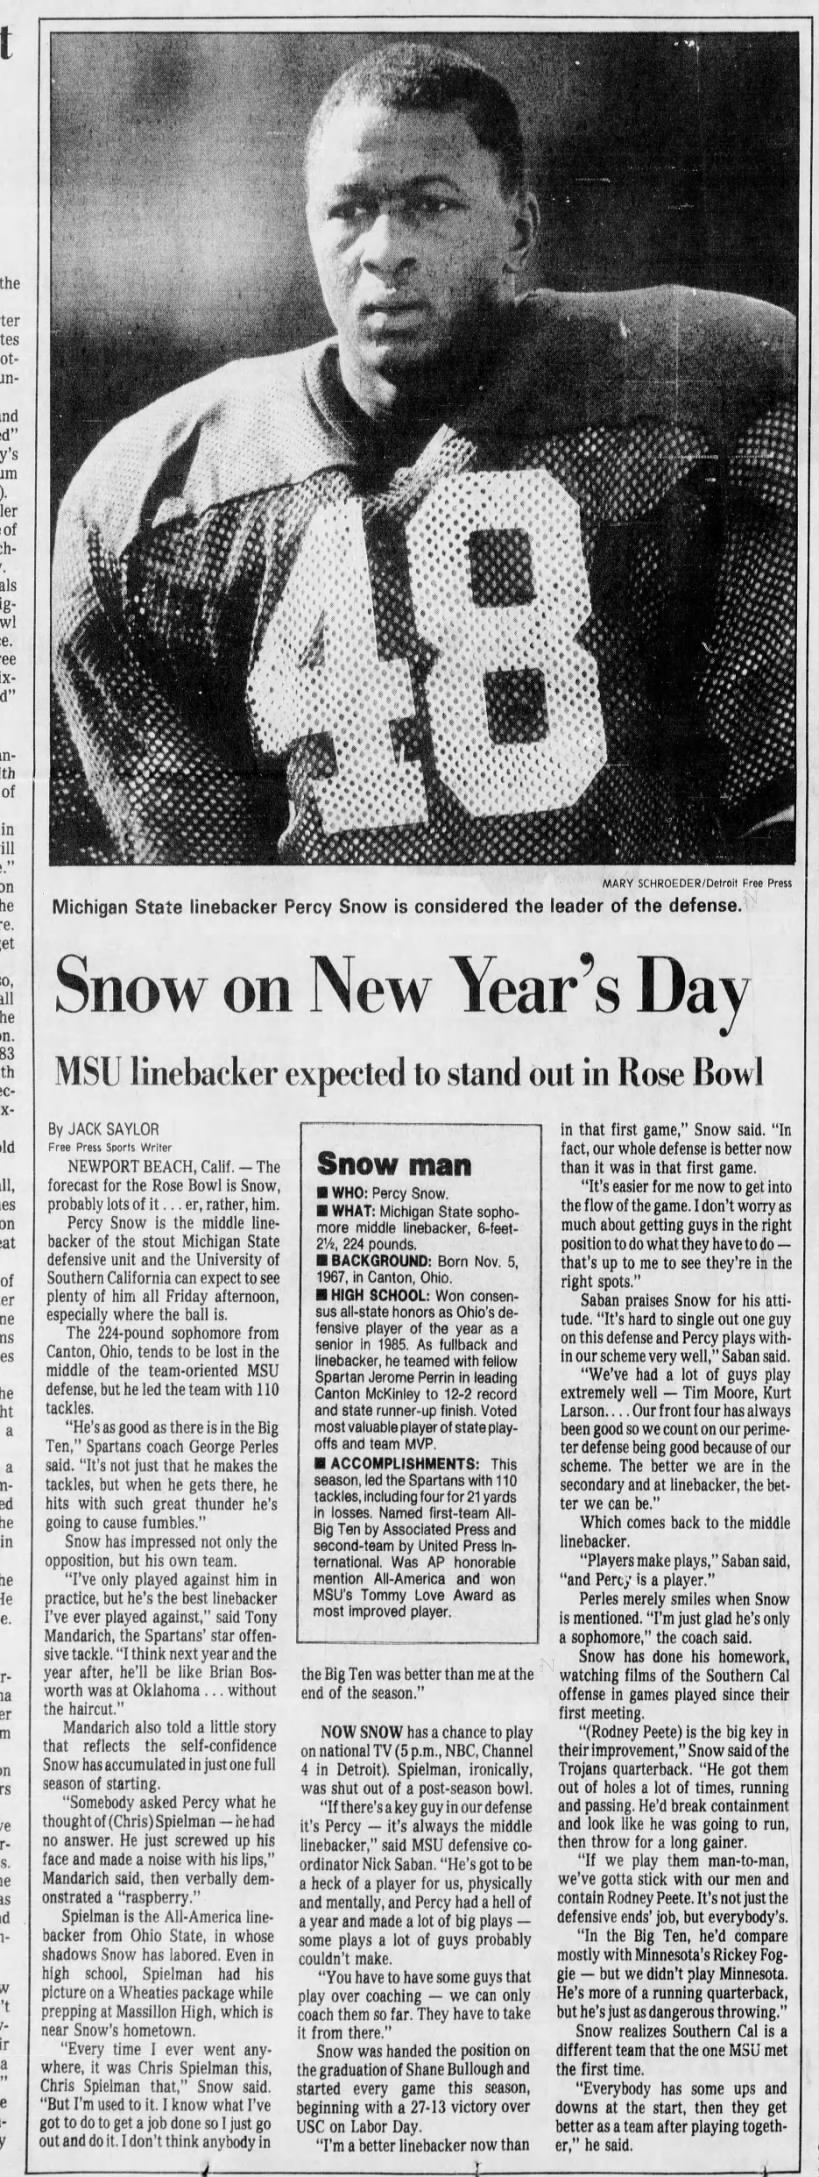 Snow on New Year's Day: MSU linebacker expected to stand out in Rose Bowl